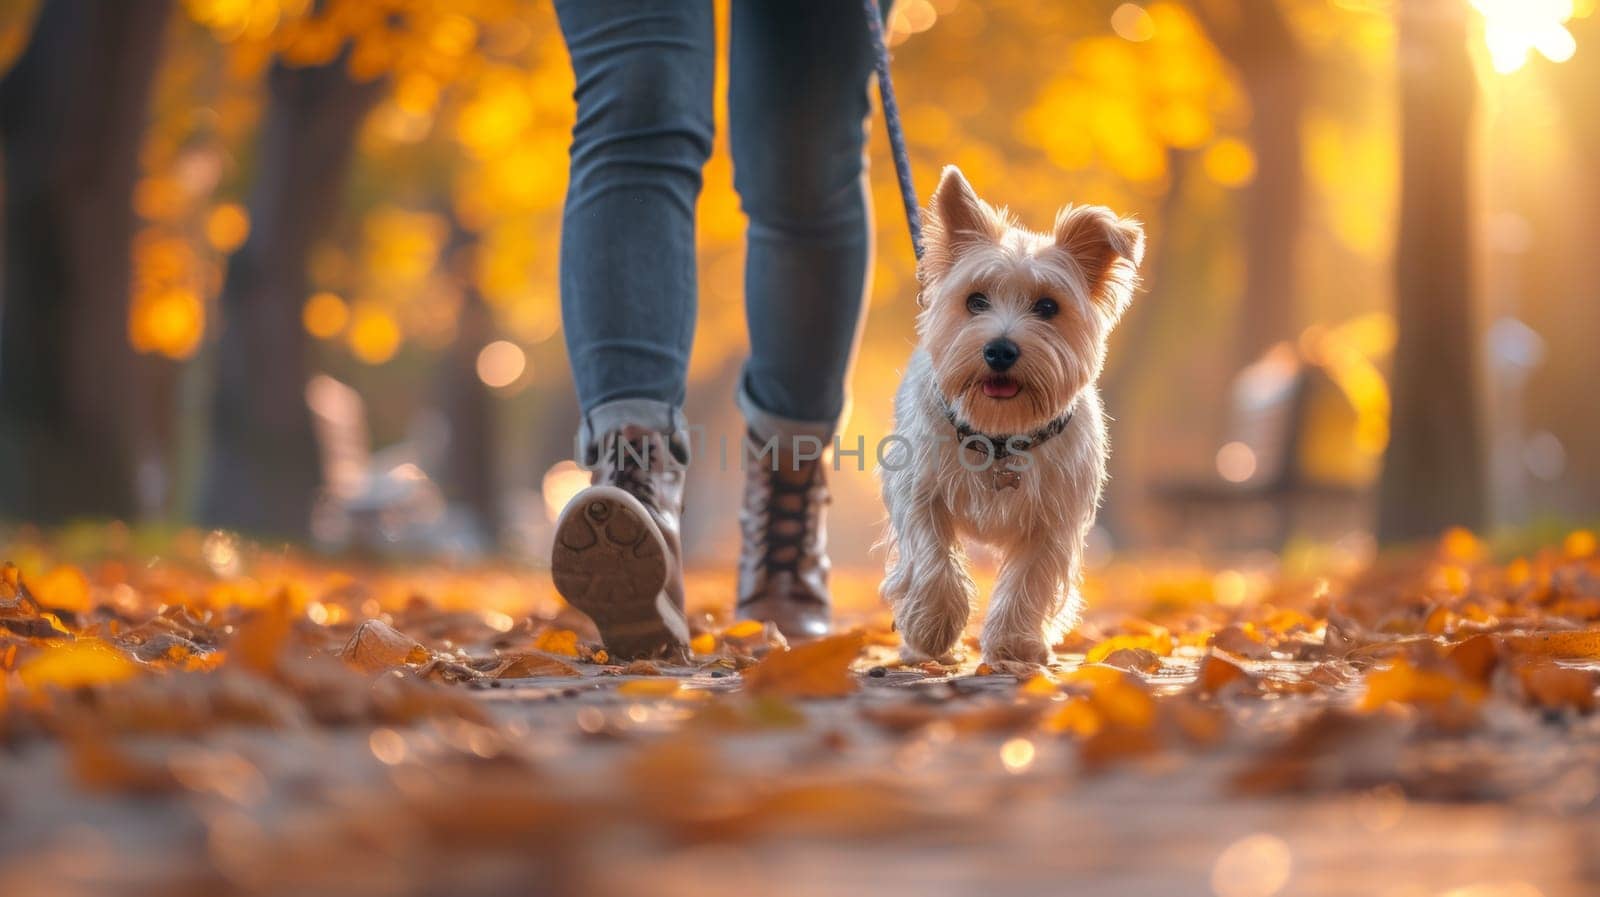 A small dog walking on a leash in the fall leaves